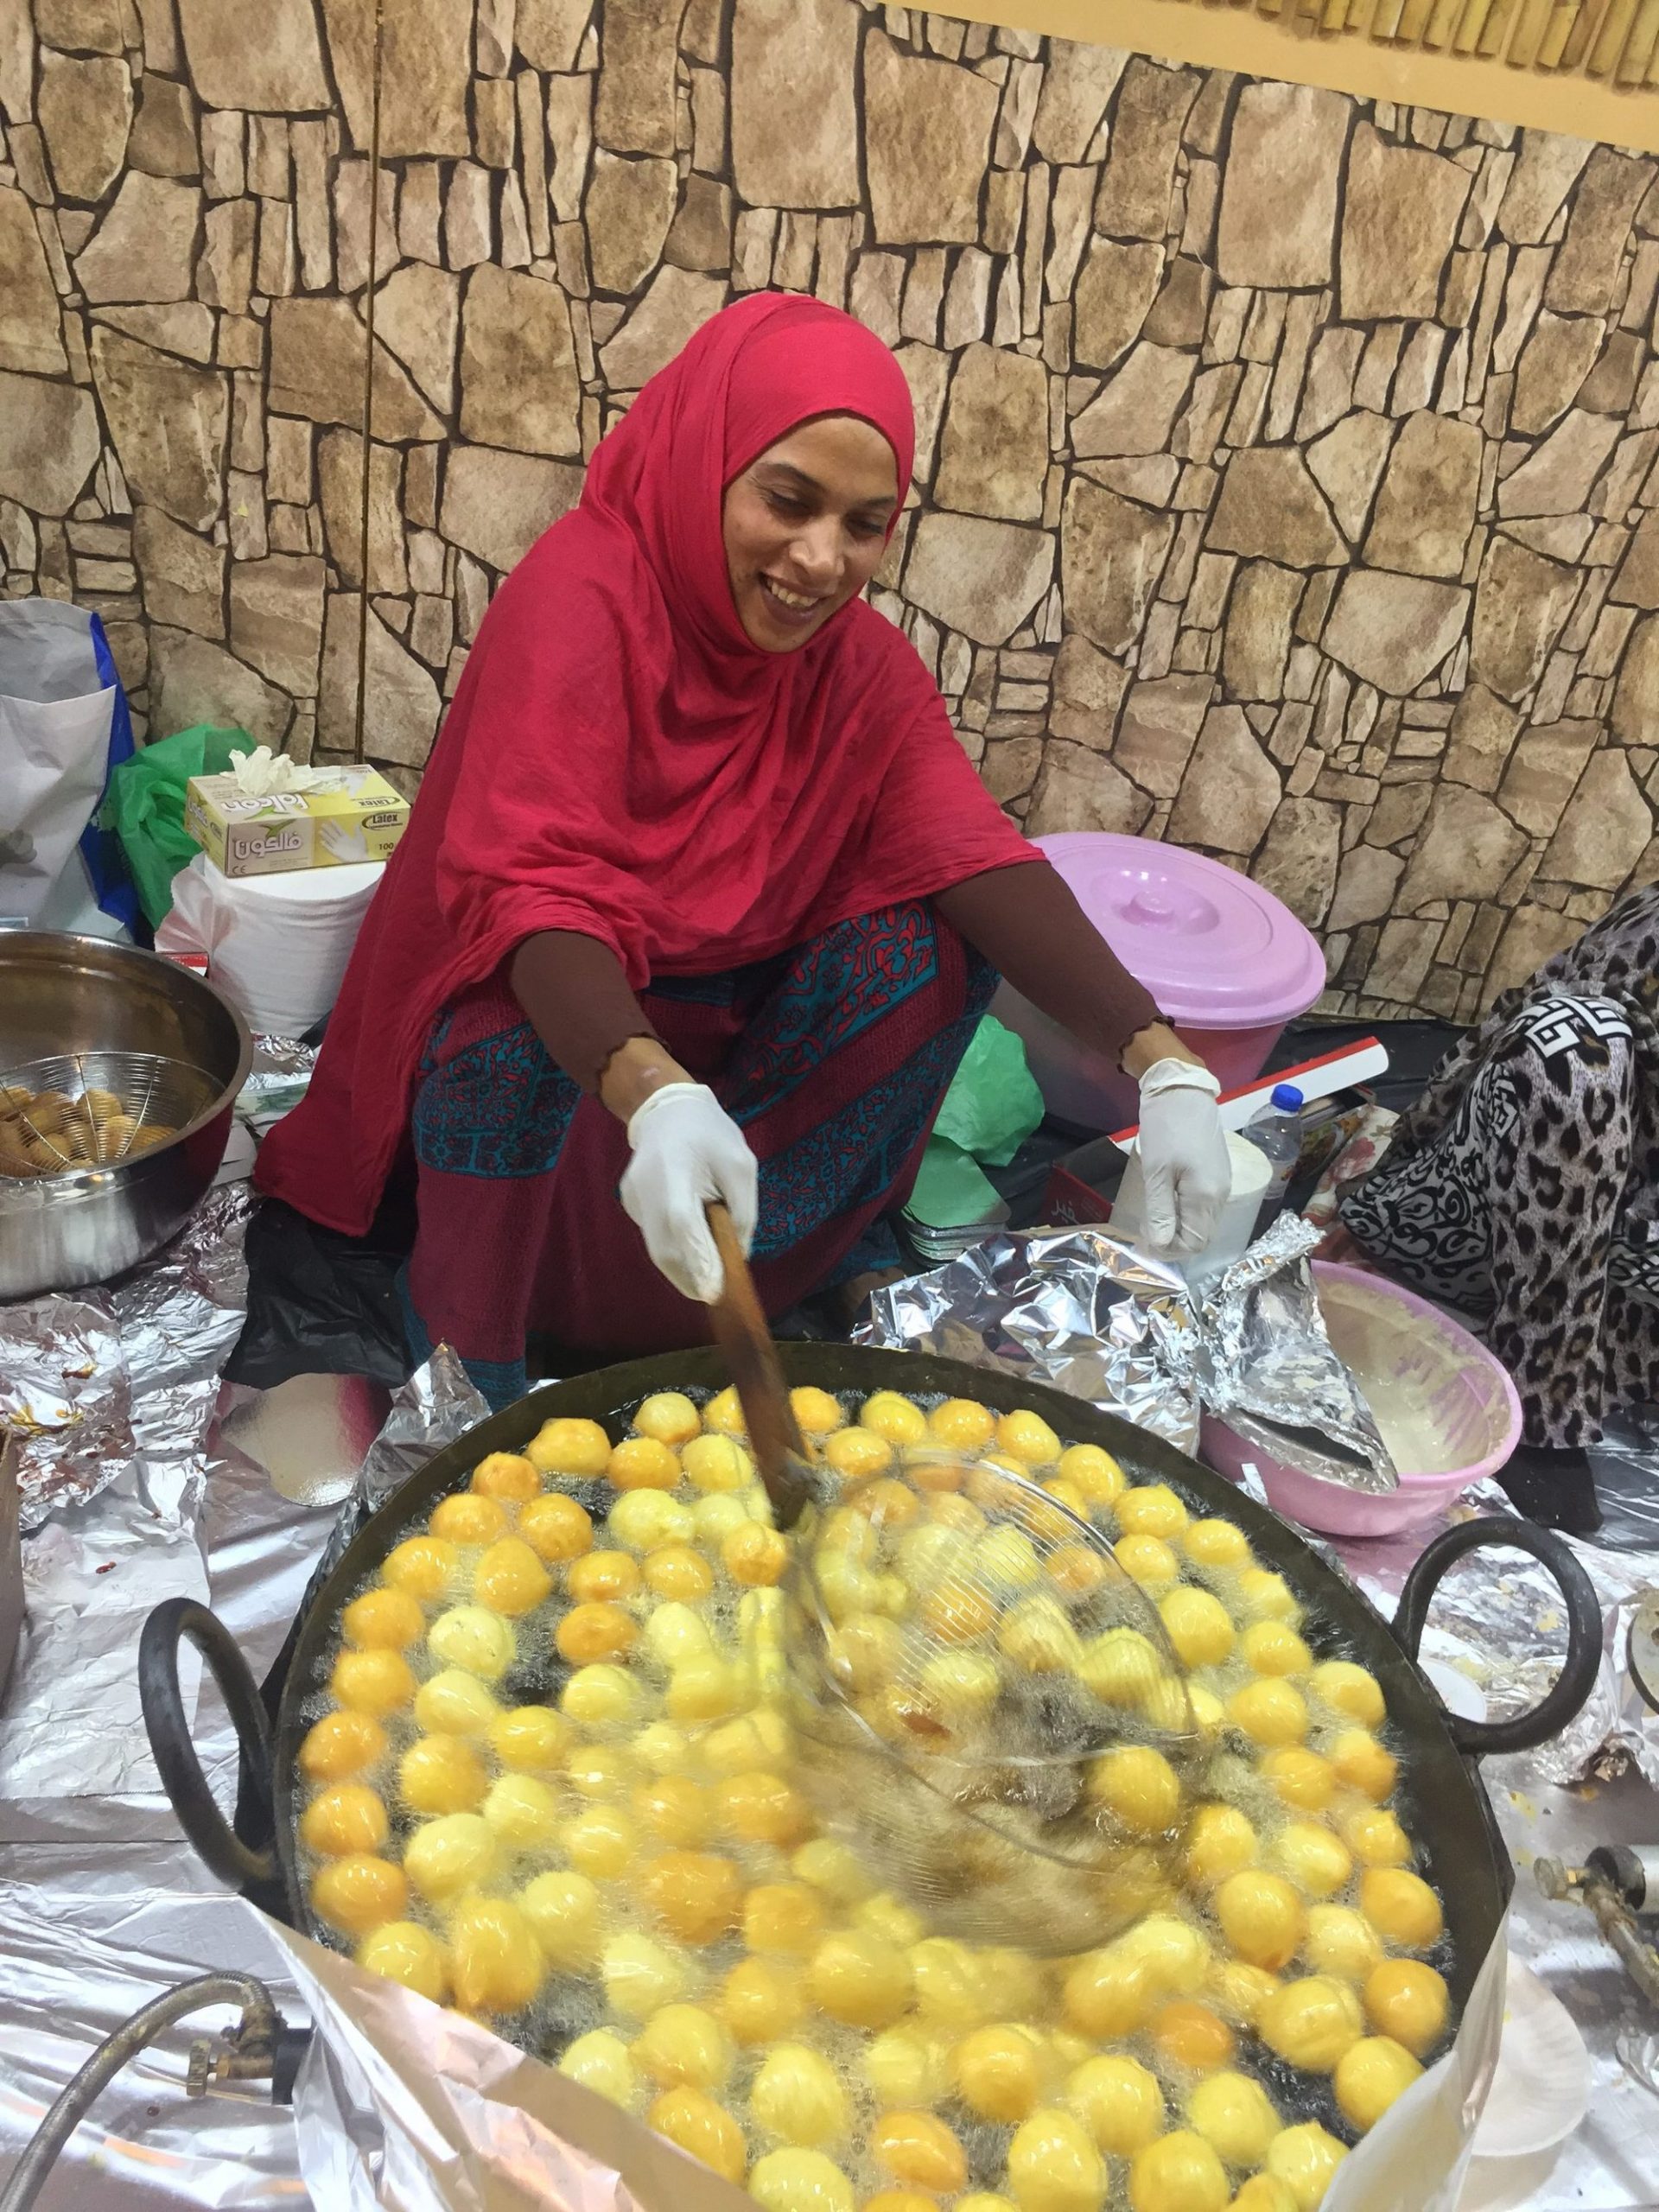 An Emirati woman whips up the famous Loqemat